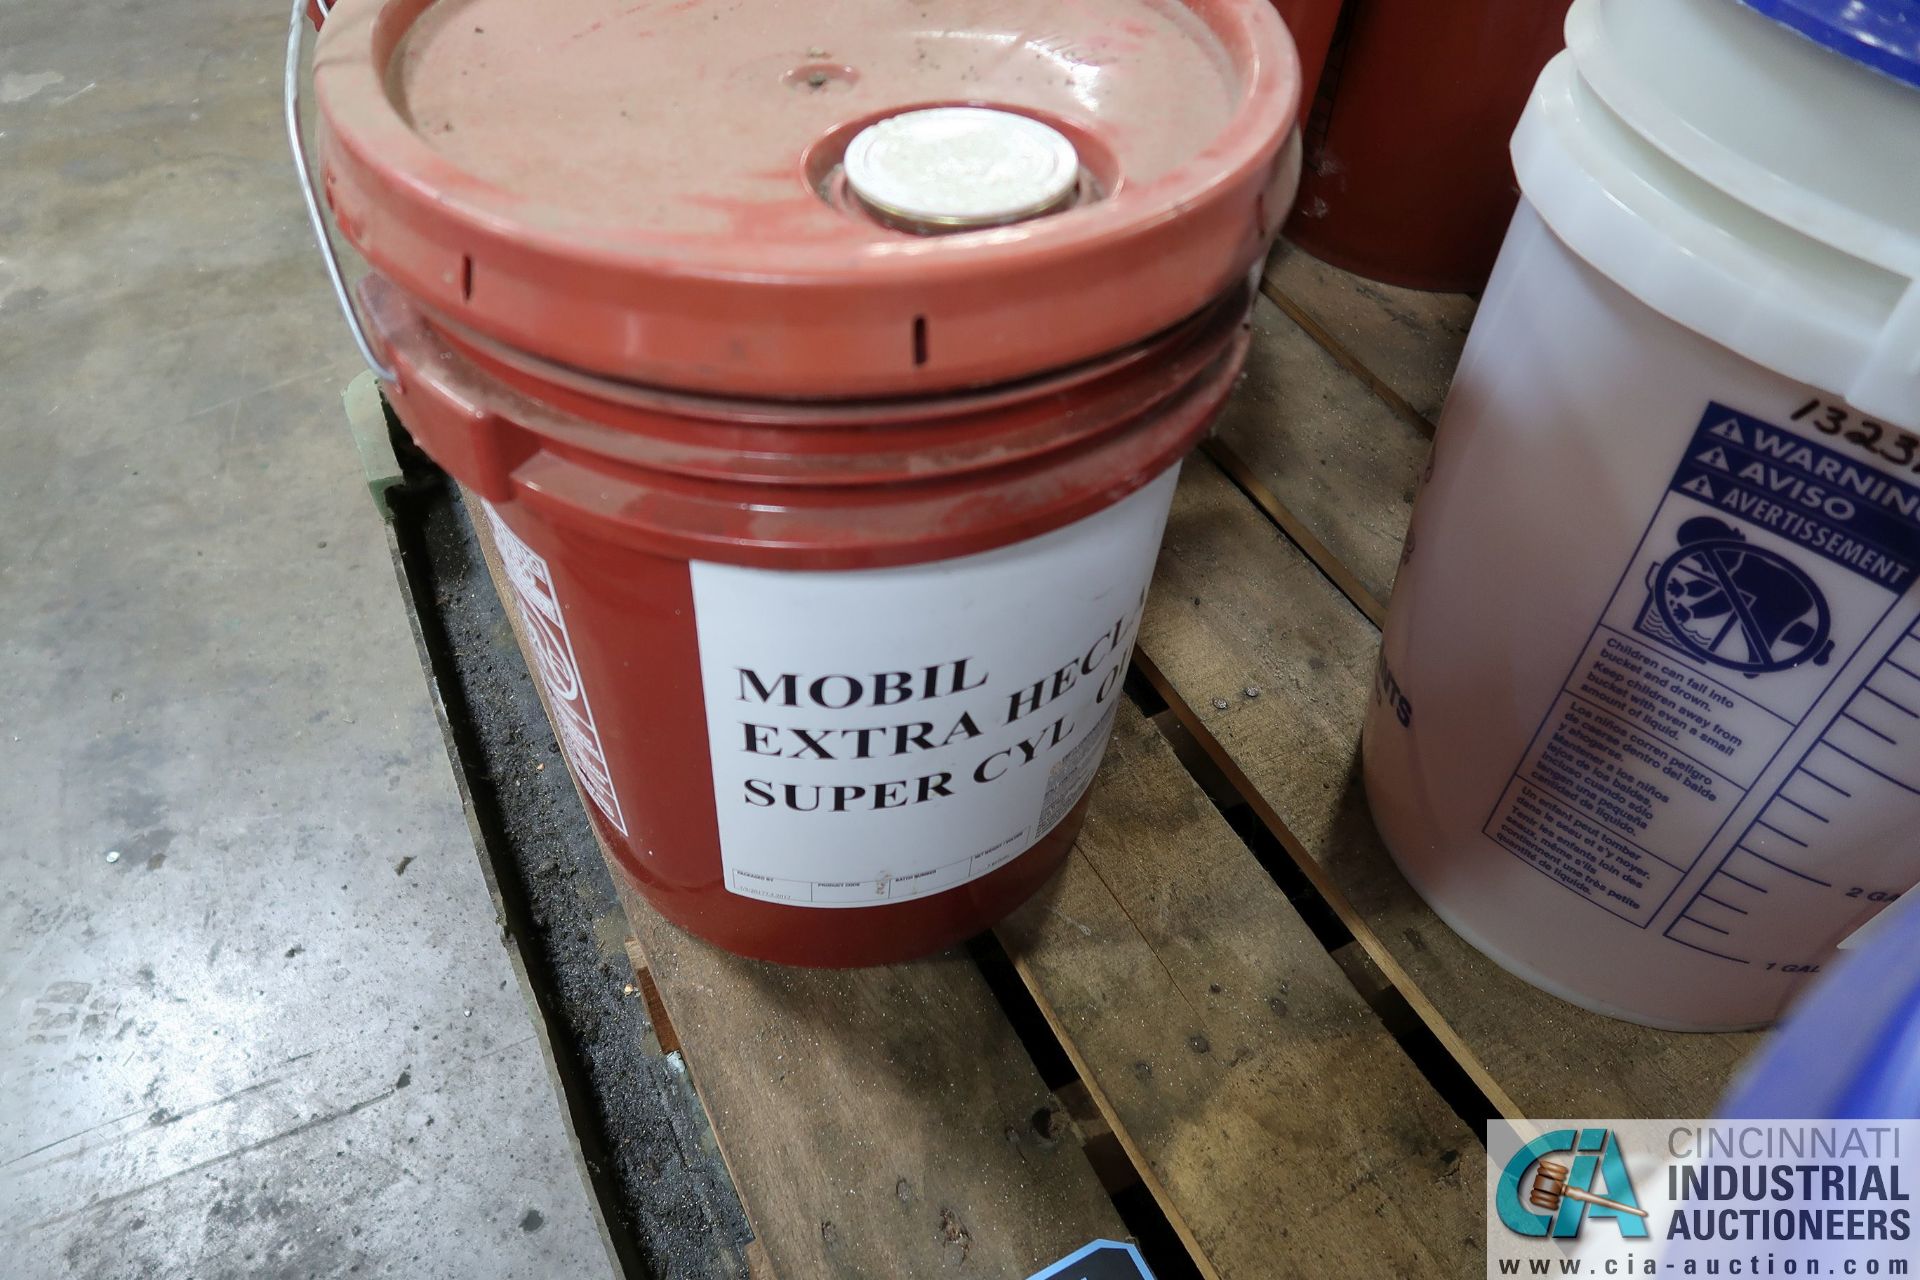 (LOT) (5) FIVE-GALLON BUCKETS ENLUBE 15-AW, (5) FIVE-GALLON BUCKETS MOBIL MISC TYPE HYDRAULIC - Image 4 of 4